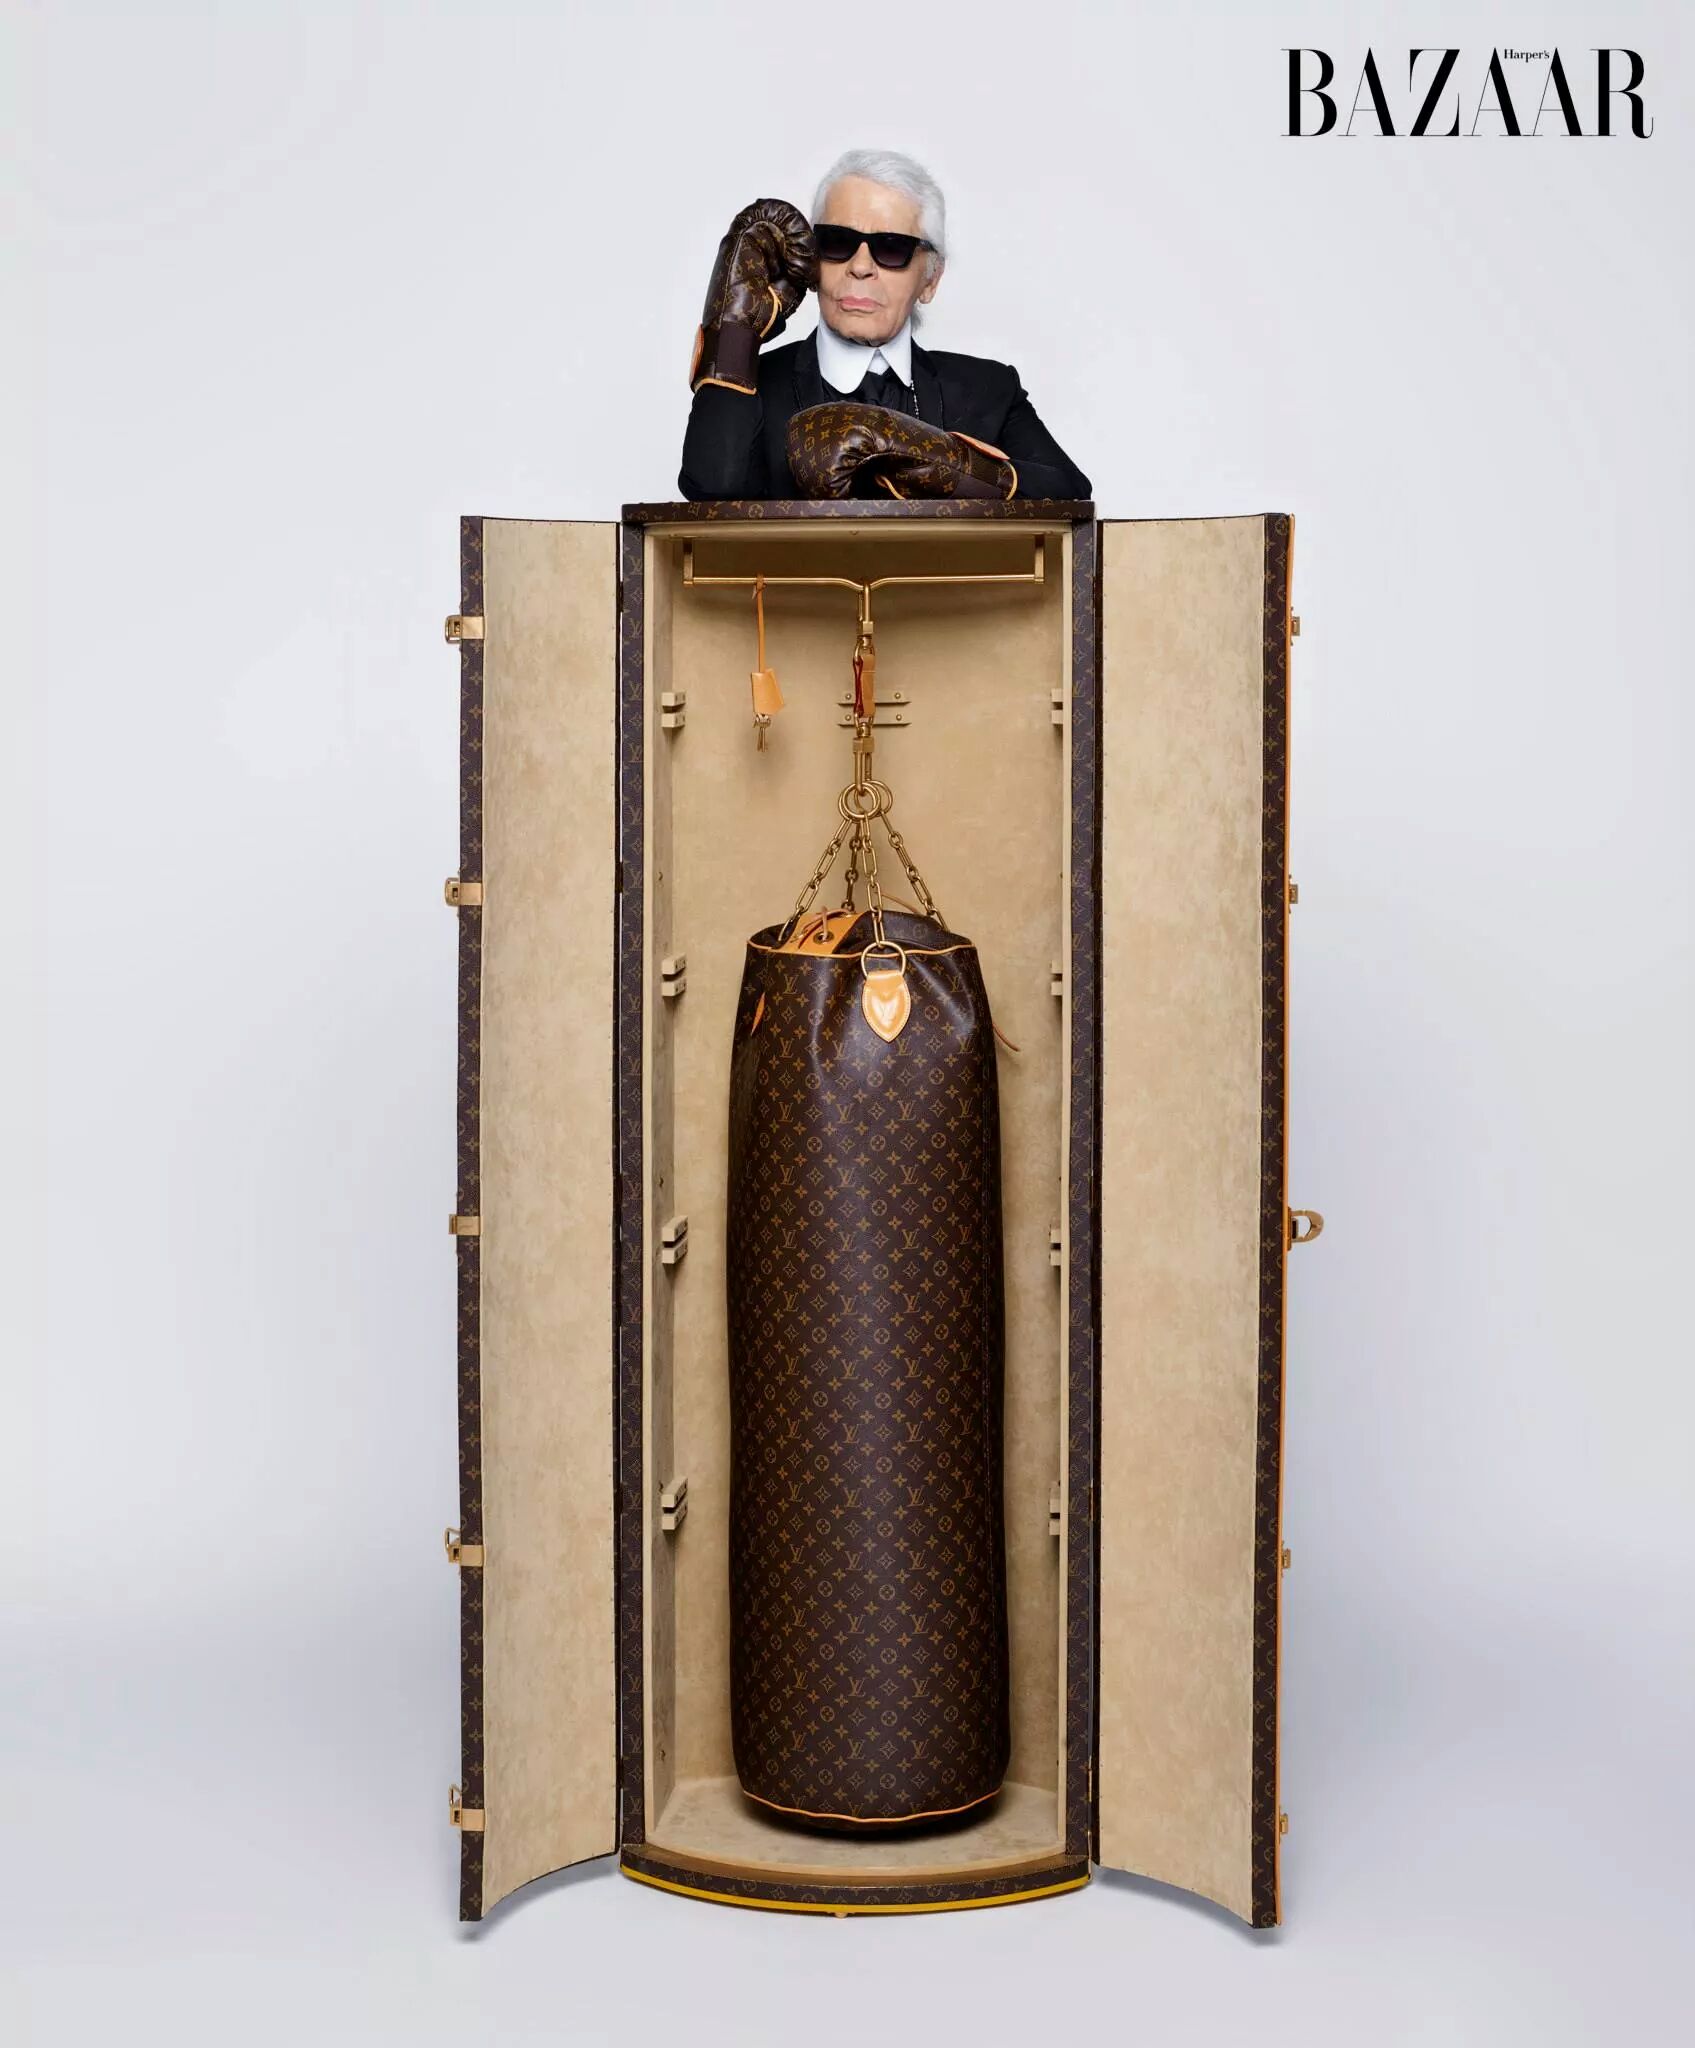 Louis Vuitton - Karl Lagerfeld at work for the Louis Vuitton Celebrating  Monogram Collection.